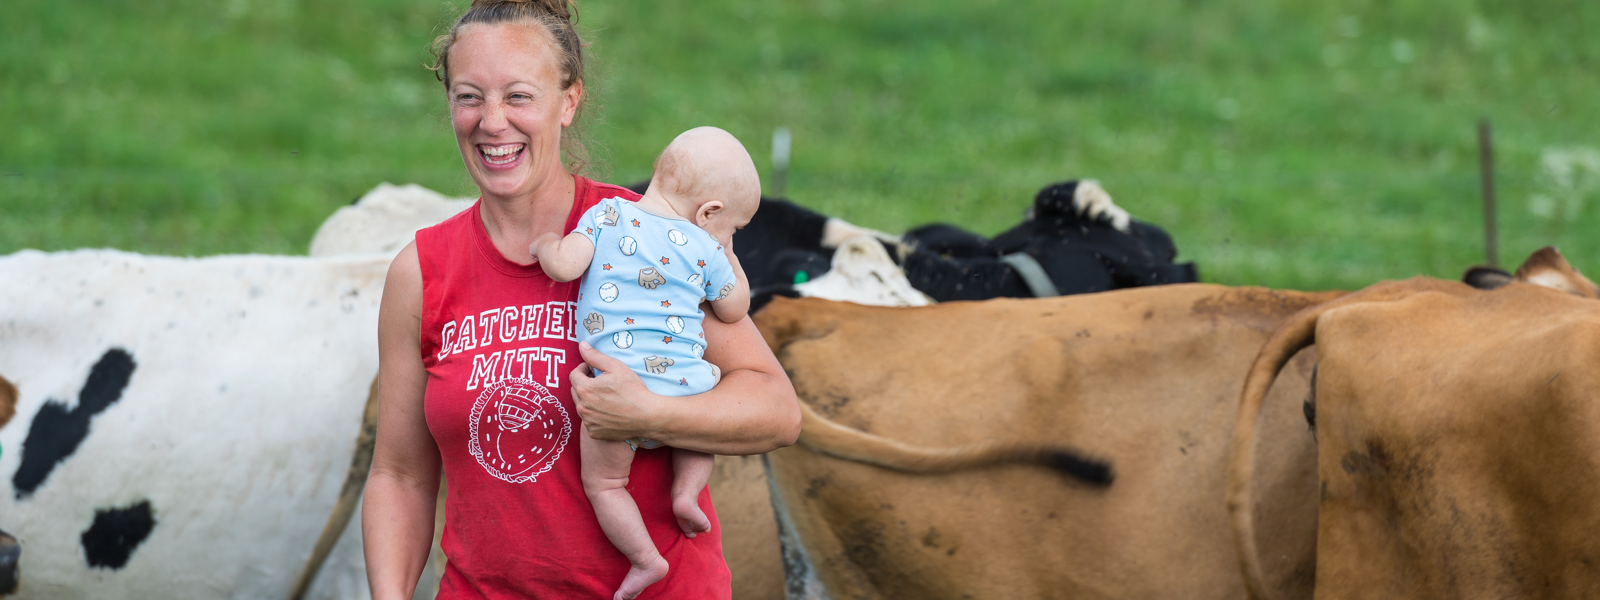 Amy Koenig has a big smile while carrying her baby through a pasture with cows behind her.